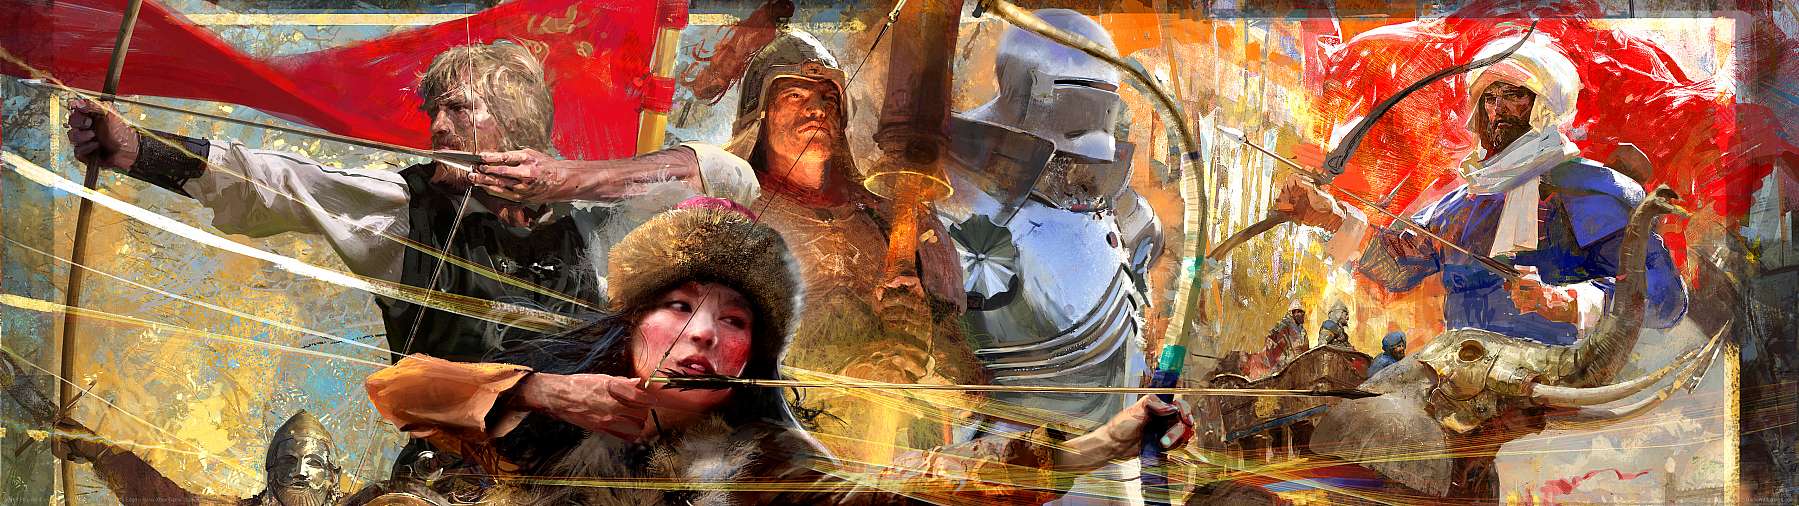 Age of Empires 4 superwide wallpaper or background 02